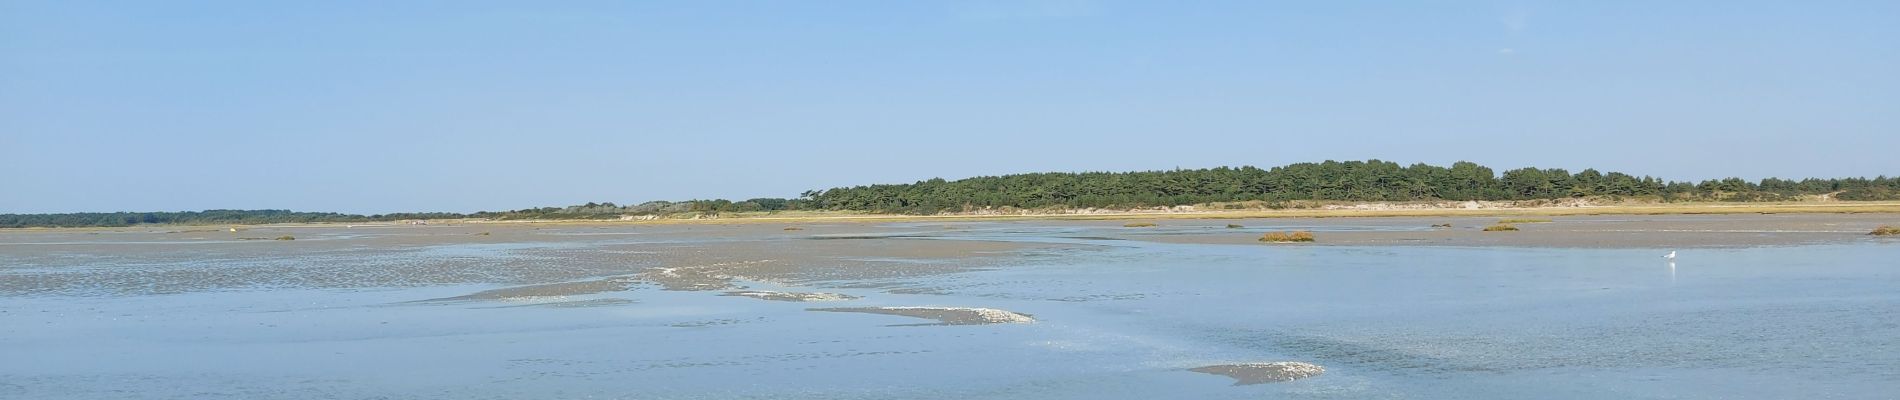 Tocht Stappen Le Crotoy - balade baie de somme - Photo